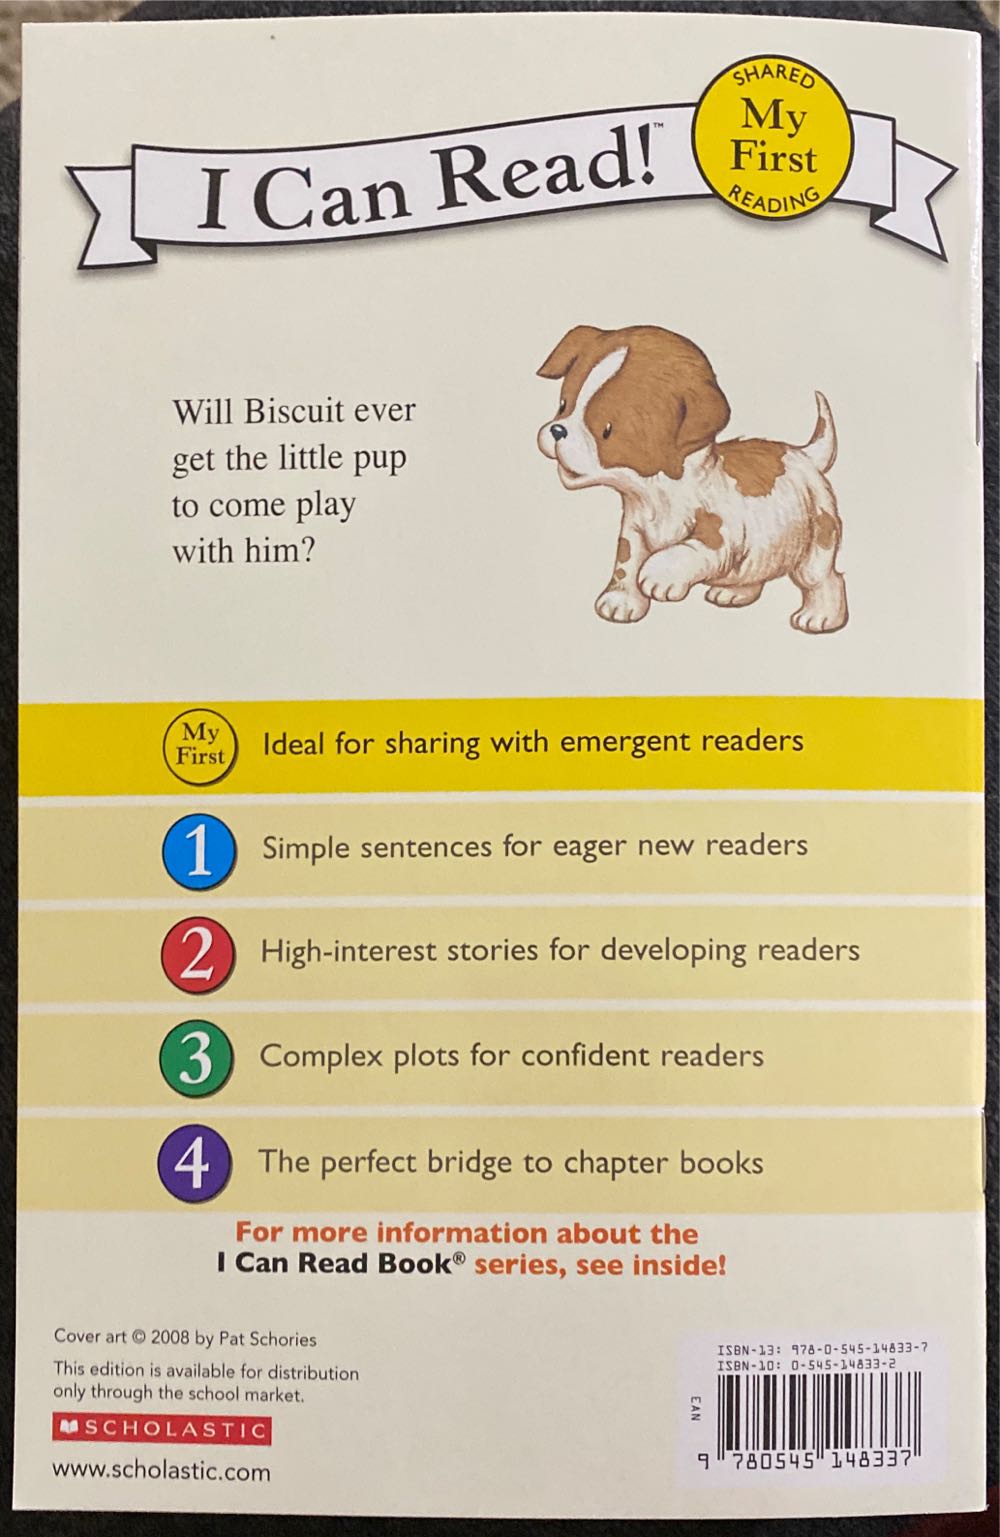 Biscuit And The Little Pup - Alyssa Satin Capucilli (Scholastic Inc. - Paperback) book collectible [Barcode 9780545148337] - Main Image 2